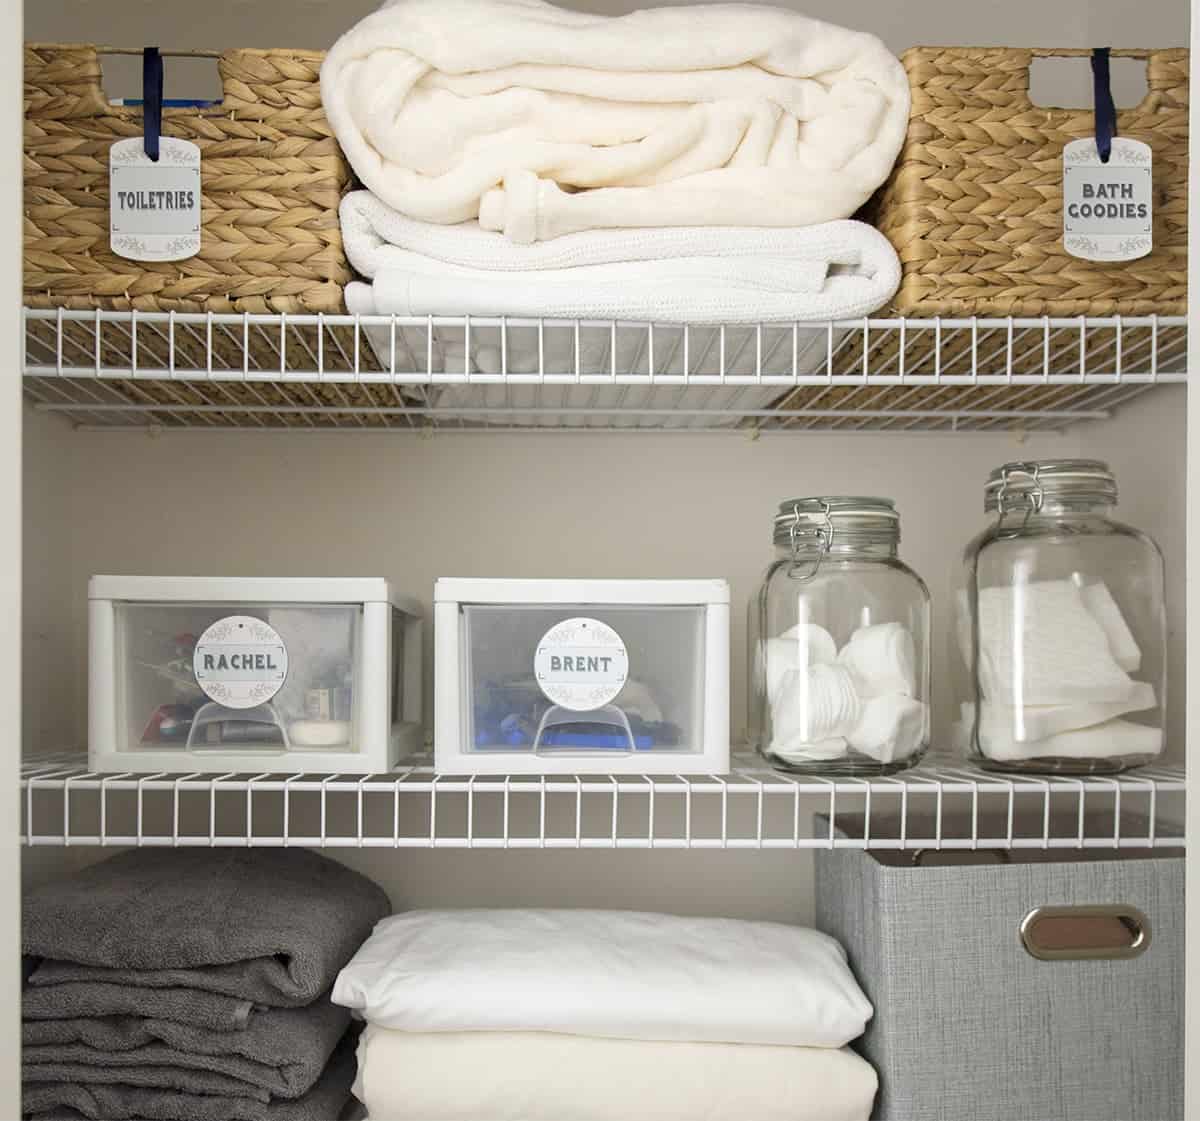 A closeup of an organized hallway linen closet with baskets and bins, towels, and organization labels.